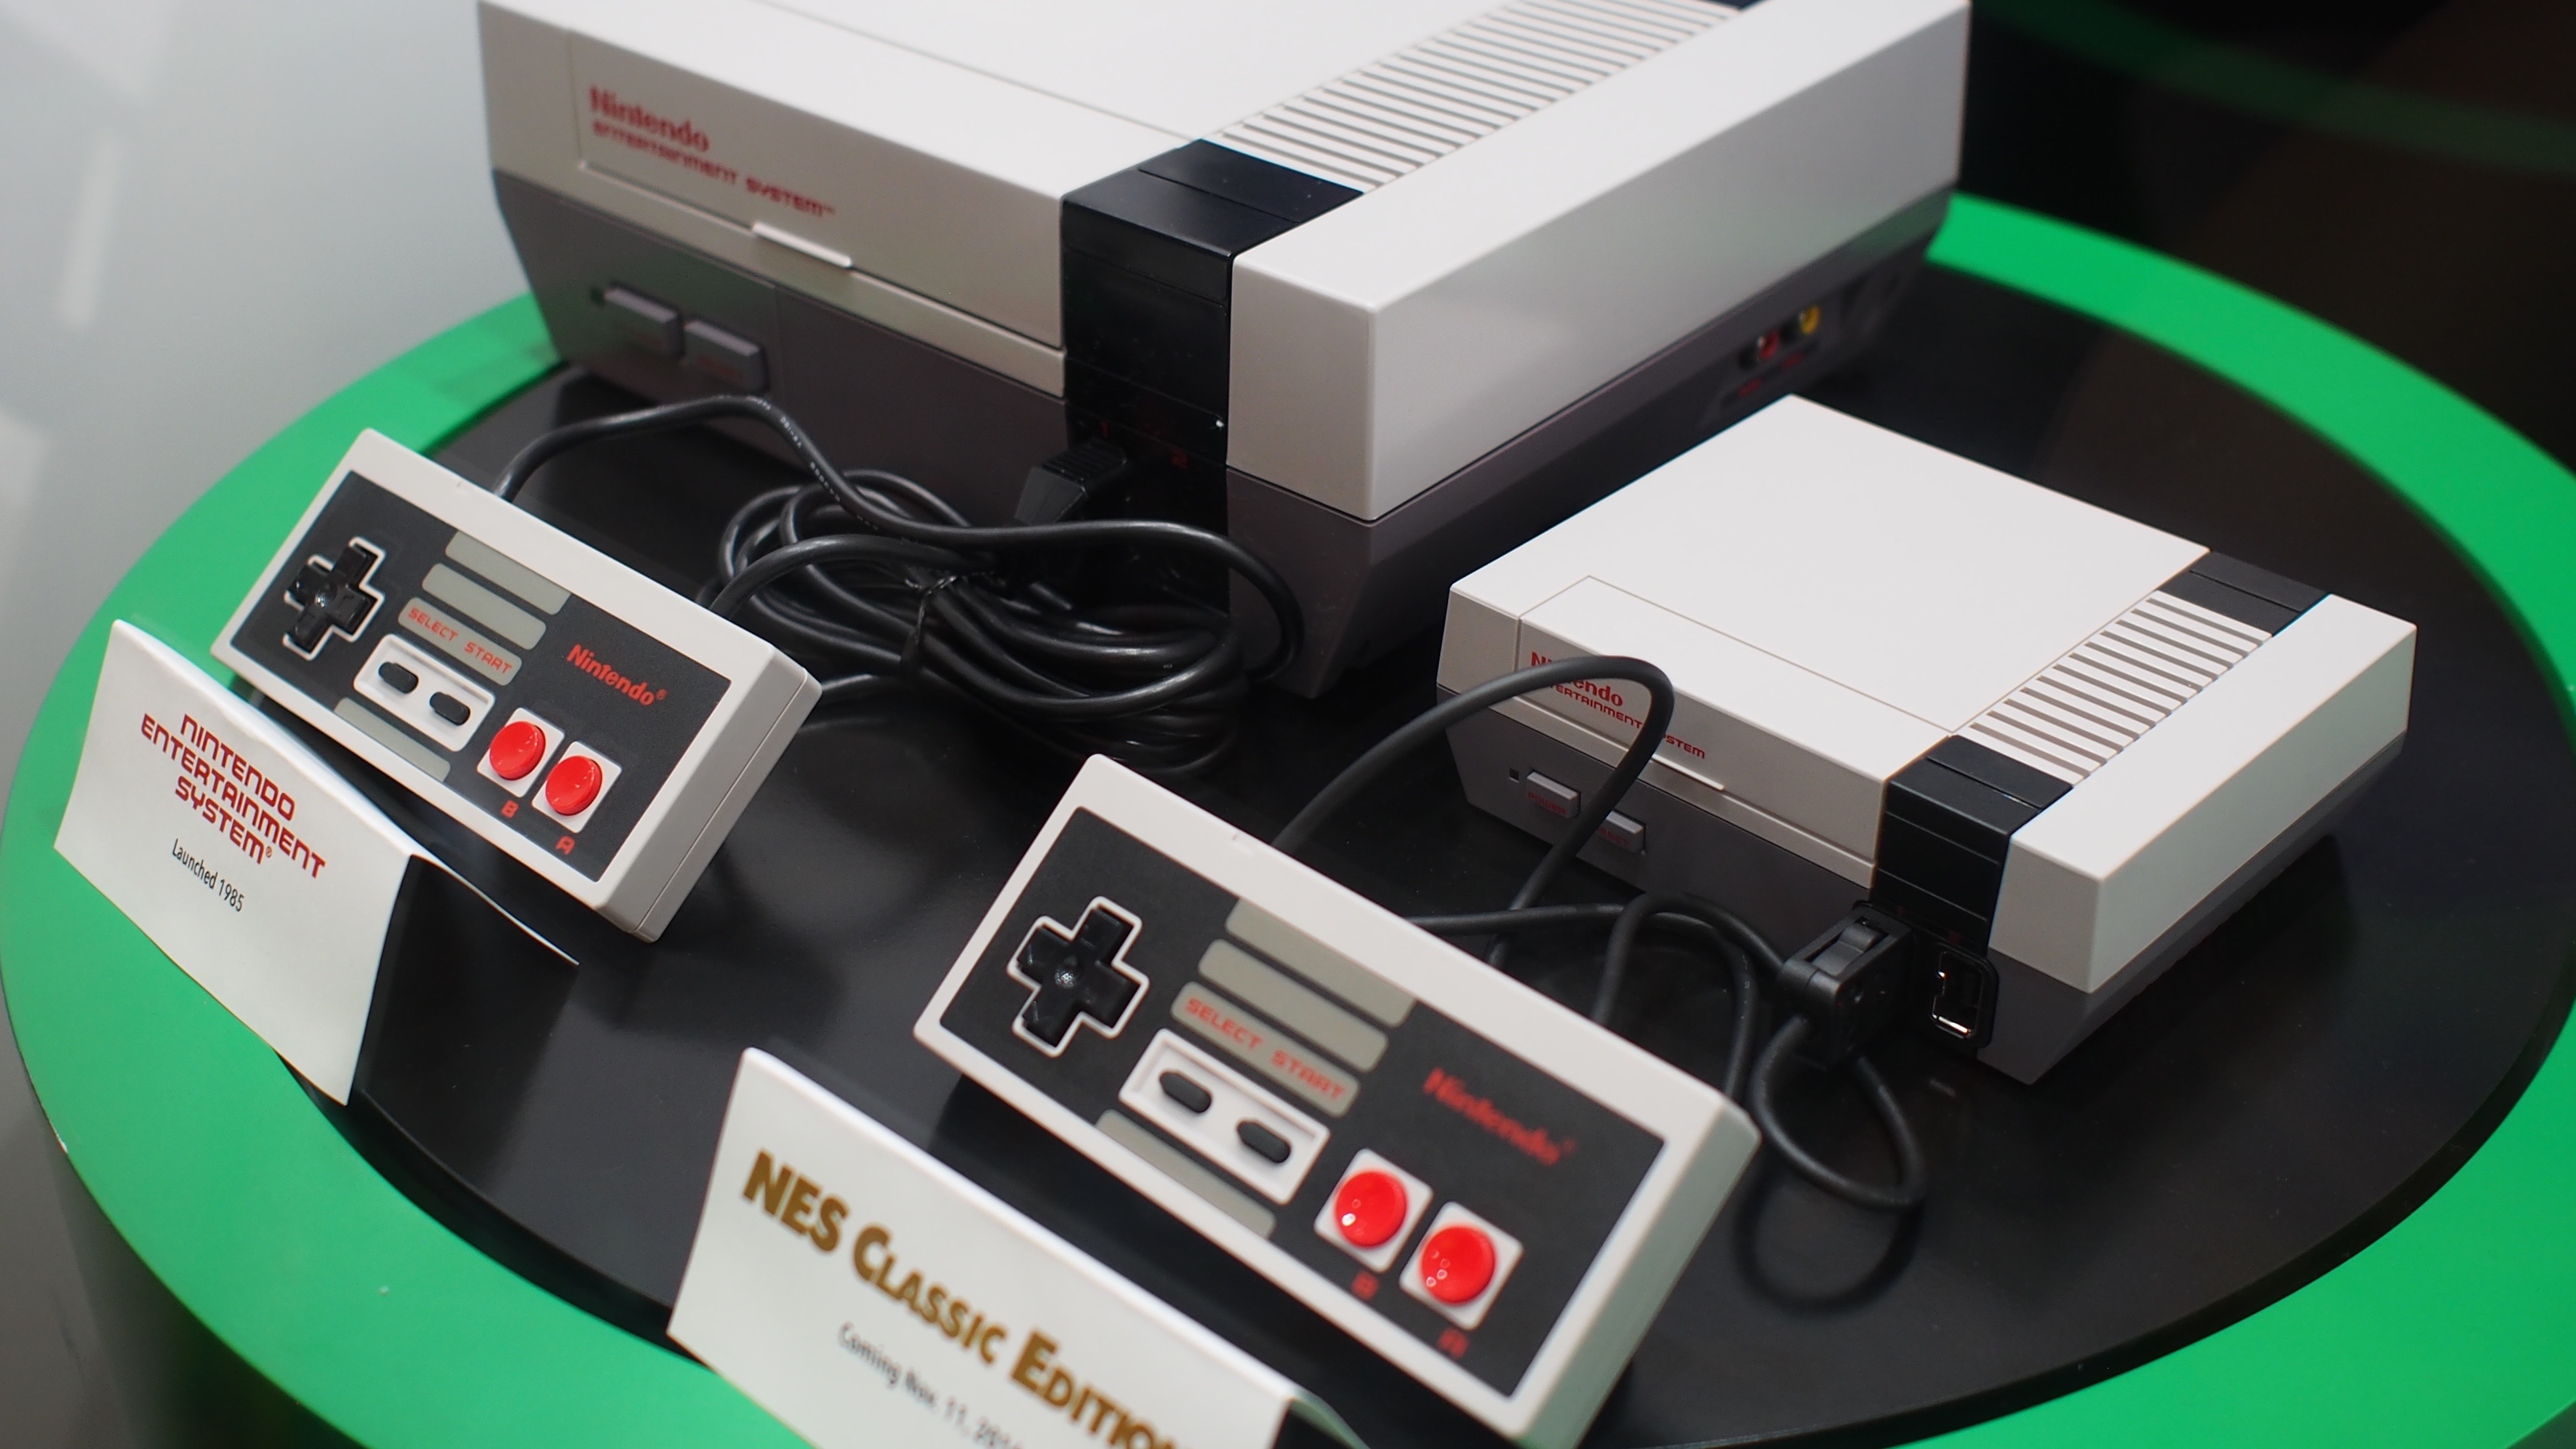 Here's what the mini Nintendo NES Classic Edition looks like in the flesh